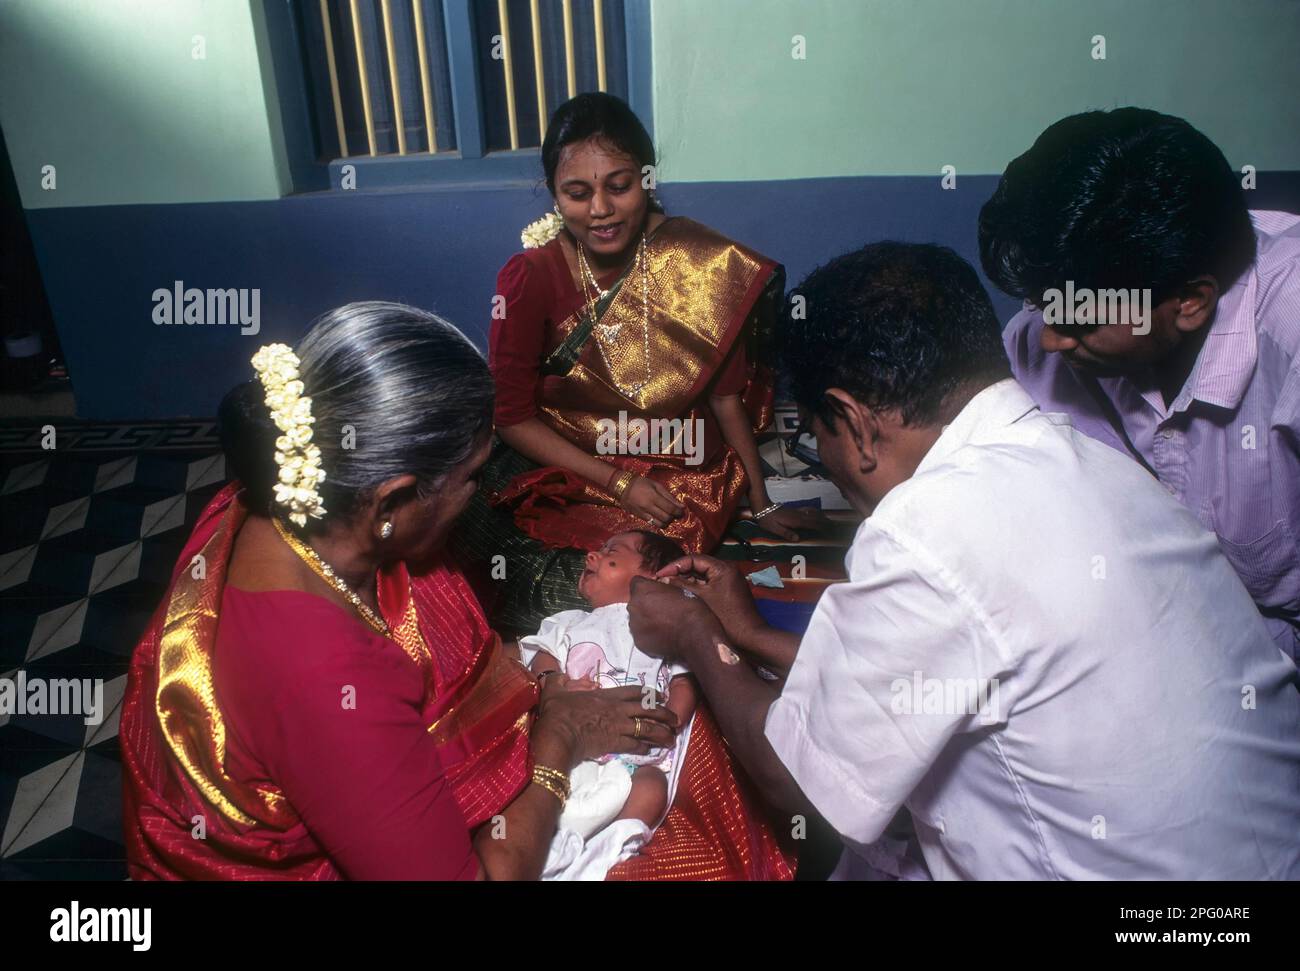 Traditionel ear boring ceremony at baby, usually in the maternal grandparent's home, Chettinad, Tamil Nadu, India Stock Photo